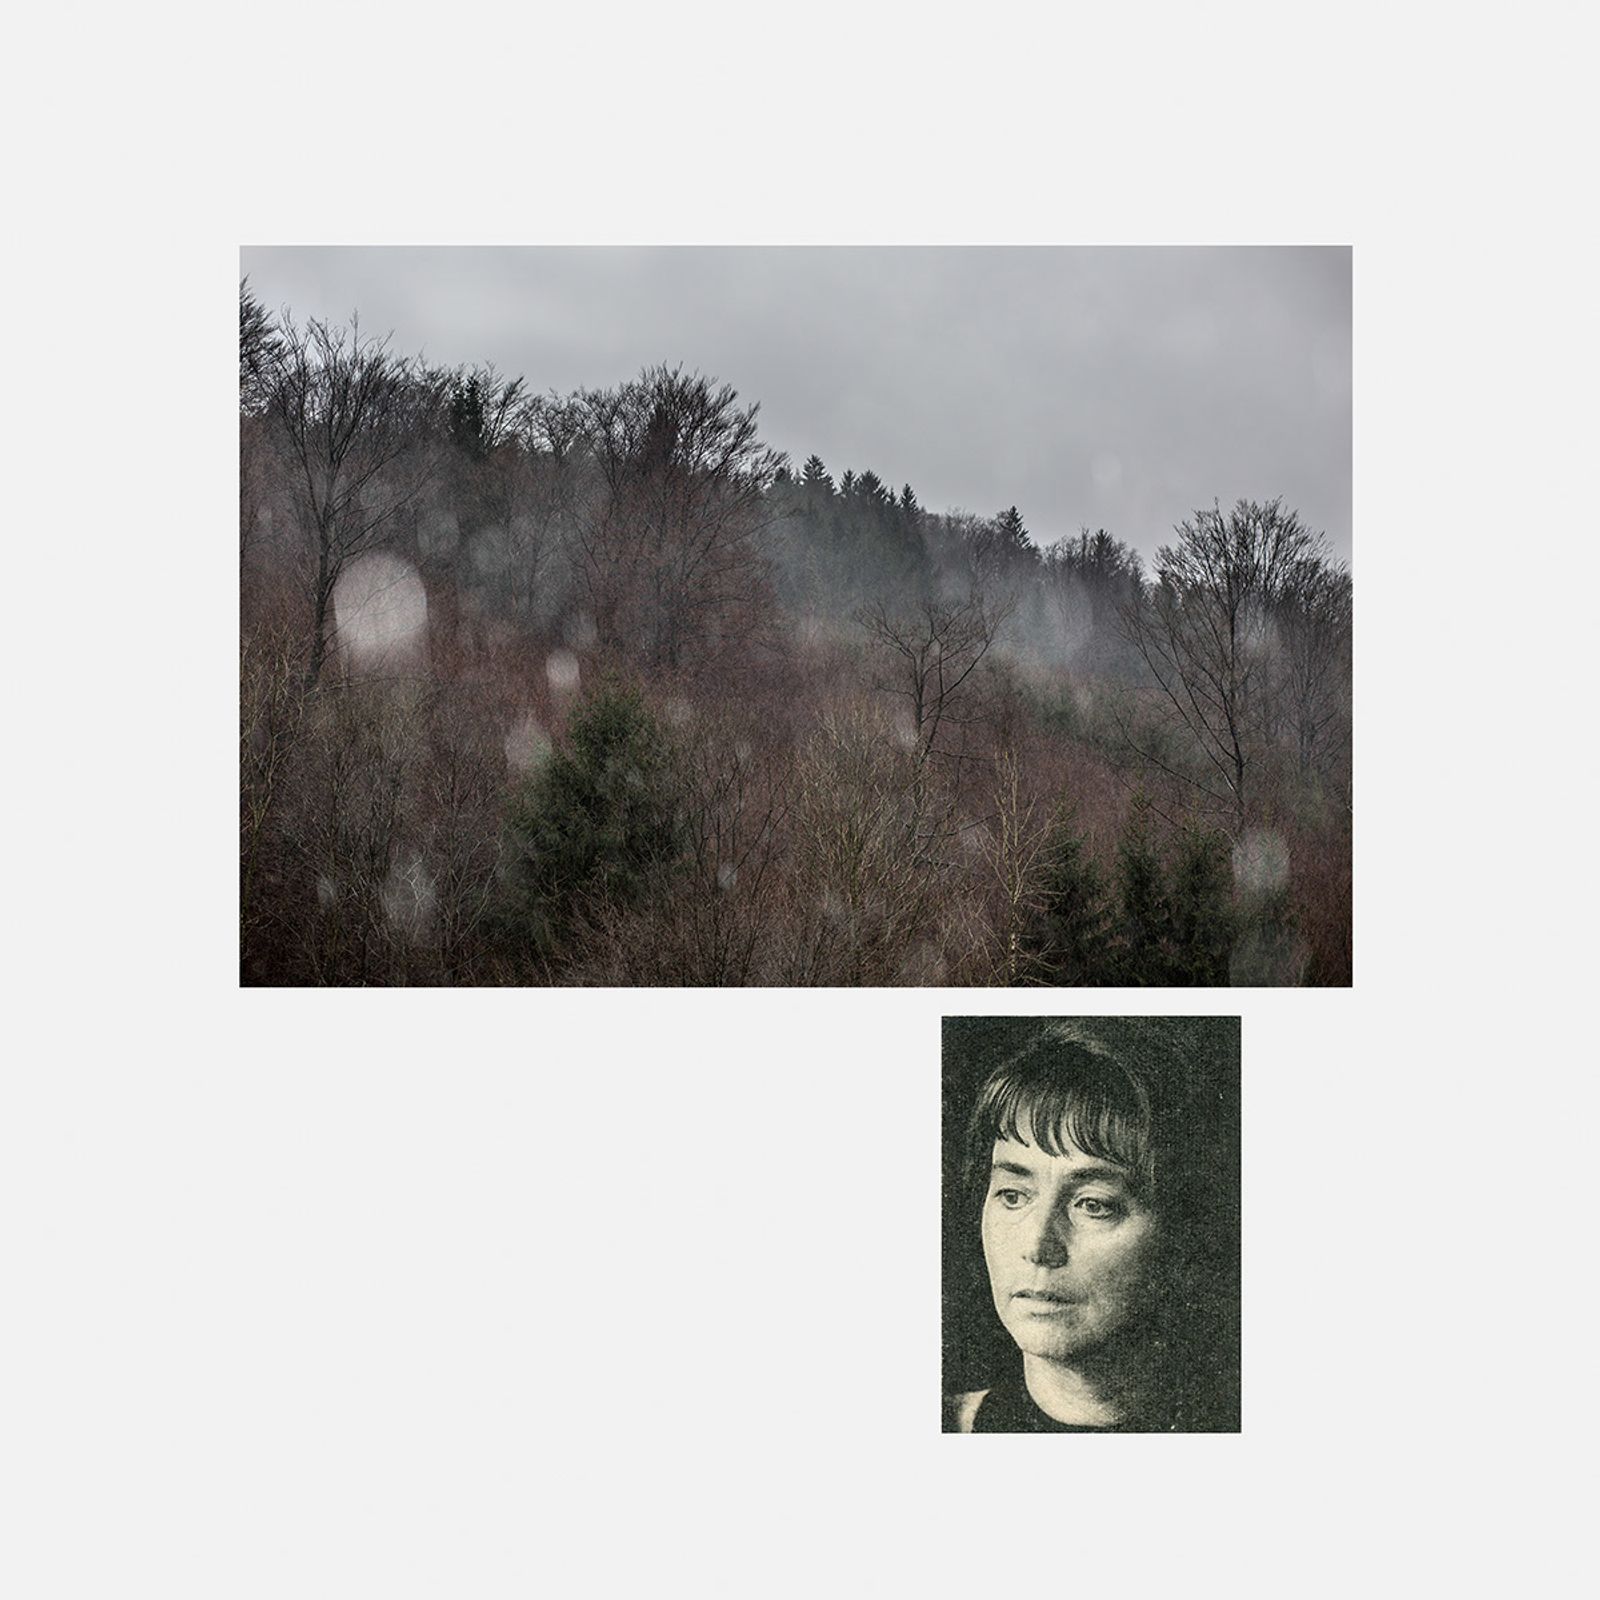 © Sarah Pabst - The view from my childhood window and a portrait of my grandmother in the 1950s, after the war.